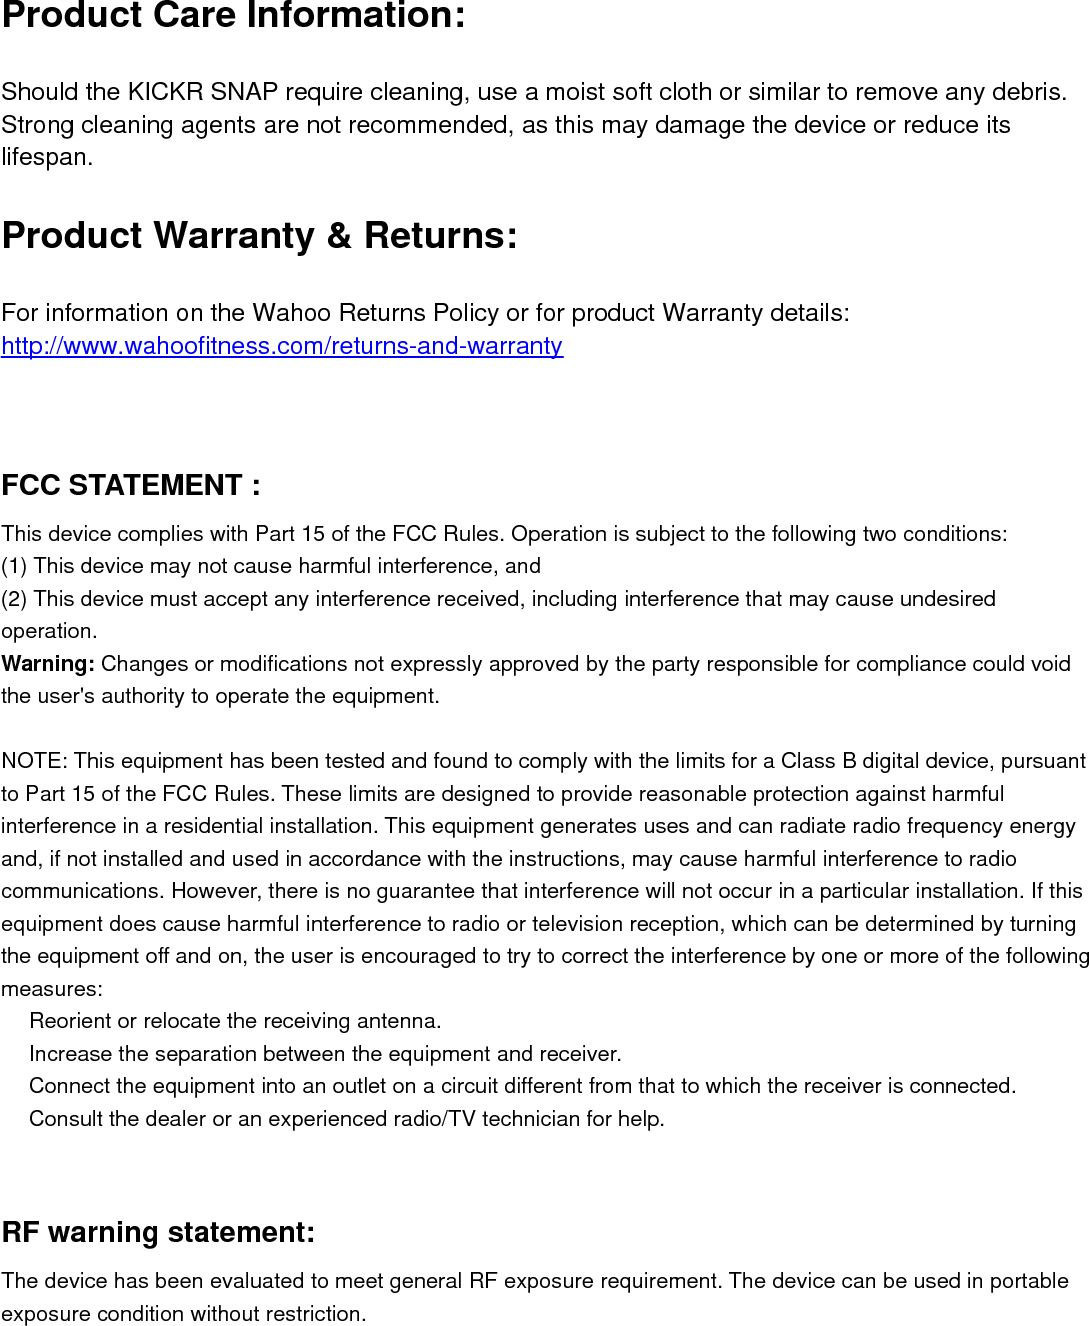 Product Care Information:Should the KICKR SNAP require cleaning, use a moist soft cloth or similar to remove any debris.Strong cleaning agents are not recommended, as this may damage the device or reduce itslifespan.Product Warranty &amp; Returns:For information on the Wahoo Returns Policy or for product Warranty details:http://www.wahoofitness.com/returns-and-warrantyFCC STATEMENT :This device complies with Part 15 of the FCC Rules. Operation is subject to the following two conditions:(1) This device may not cause harmful interference, and(2) This device must accept any interference received, including interference that may cause undesiredoperation.Warning: Changes or modifications not expressly approved by the party responsible for compliance could voidthe user&apos;s authority to operate the equipment.NOTE: This equipment has been tested and found to comply with the limits for a Class B digital device, pursuantto Part 15 of the FCC Rules. These limits are designed to provide reasonable protection against harmfulinterference in a residential installation. This equipment generates uses and can radiate radio frequency energyand, if not installed and used in accordance with the instructions, may cause harmful interference to radiocommunications. However, there is no guarantee that interference will not occur in a particular installation. If thisequipment does cause harmful interference to radio or television reception, which can be determined by turningthe equipment off and on, the user is encouraged to try to correct the interference by one or more of the followingmeasures:　Reorient or relocate the receiving antenna.　Increase the separation between the equipment and receiver.　Connect the equipment into an outlet on a circuit different from that to which the receiver is connected.　Consult the dealer or an experienced radio/TV technician for help.RF warning statement:The device has been evaluated to meet general RF exposure requirement. The device can be used in portableexposure condition without restriction.